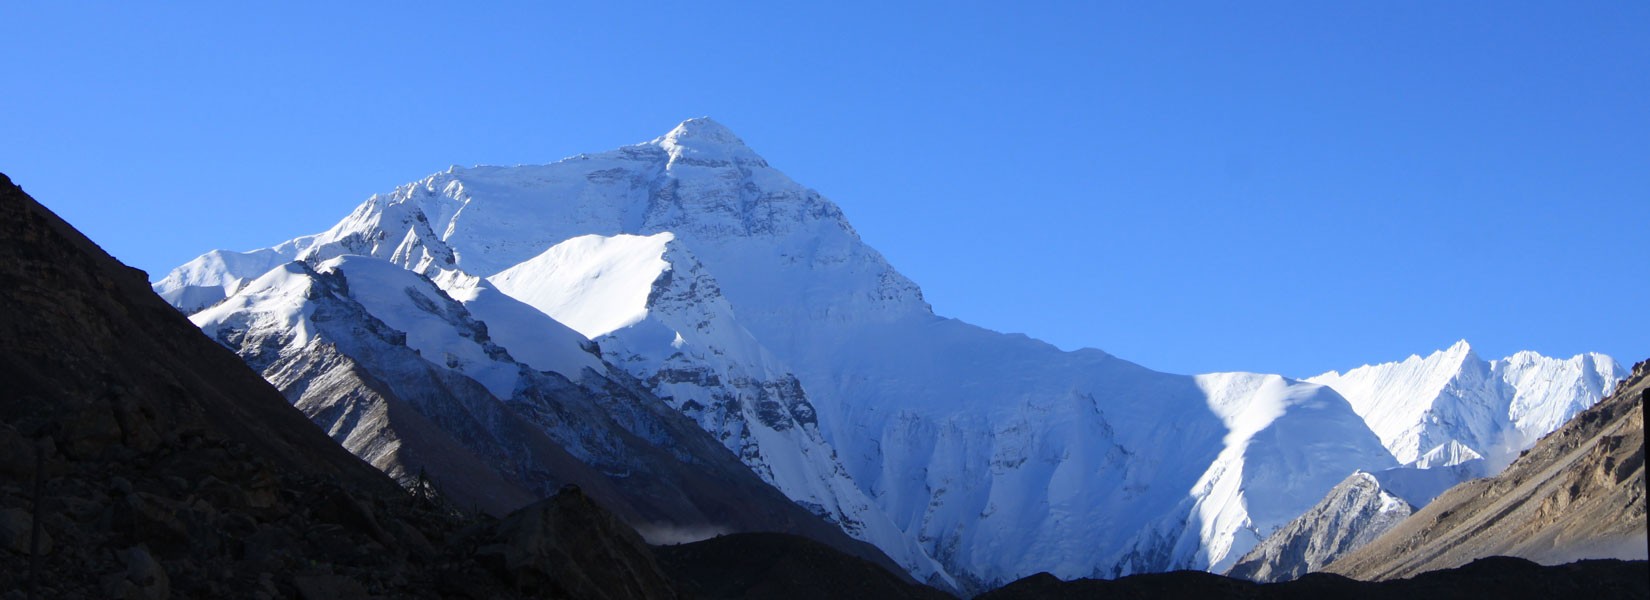 Everest Base Camp Tour from Lhasa